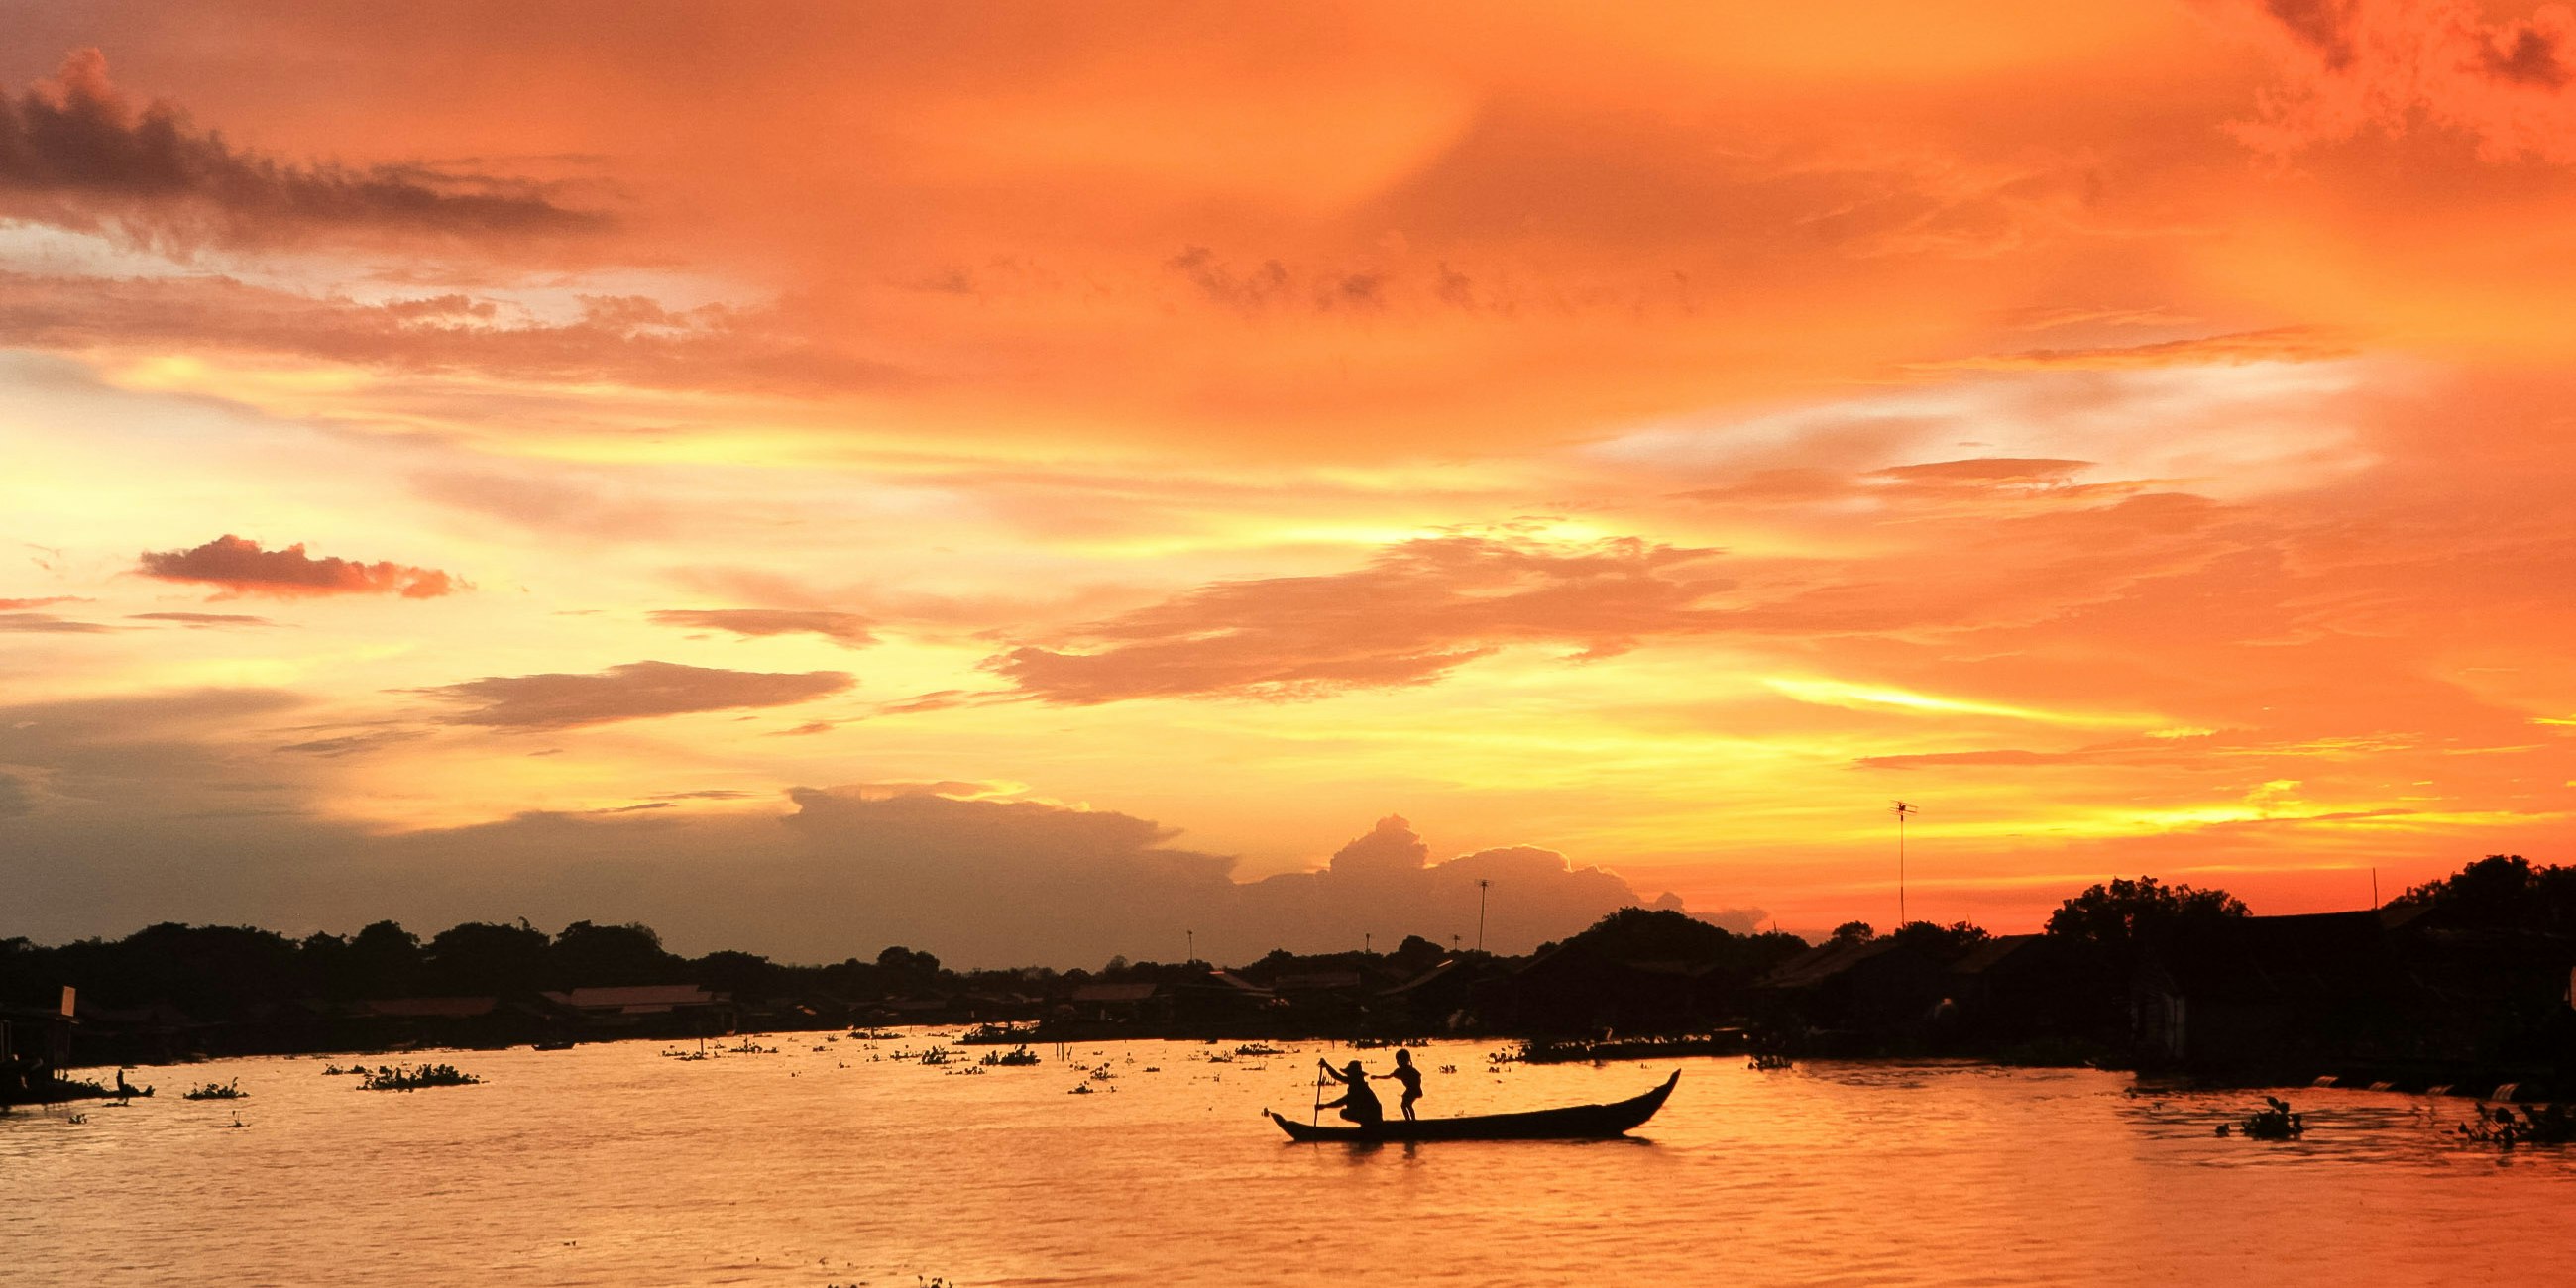 A to Z: Everything You Need to Know About Traveling to Cambodia